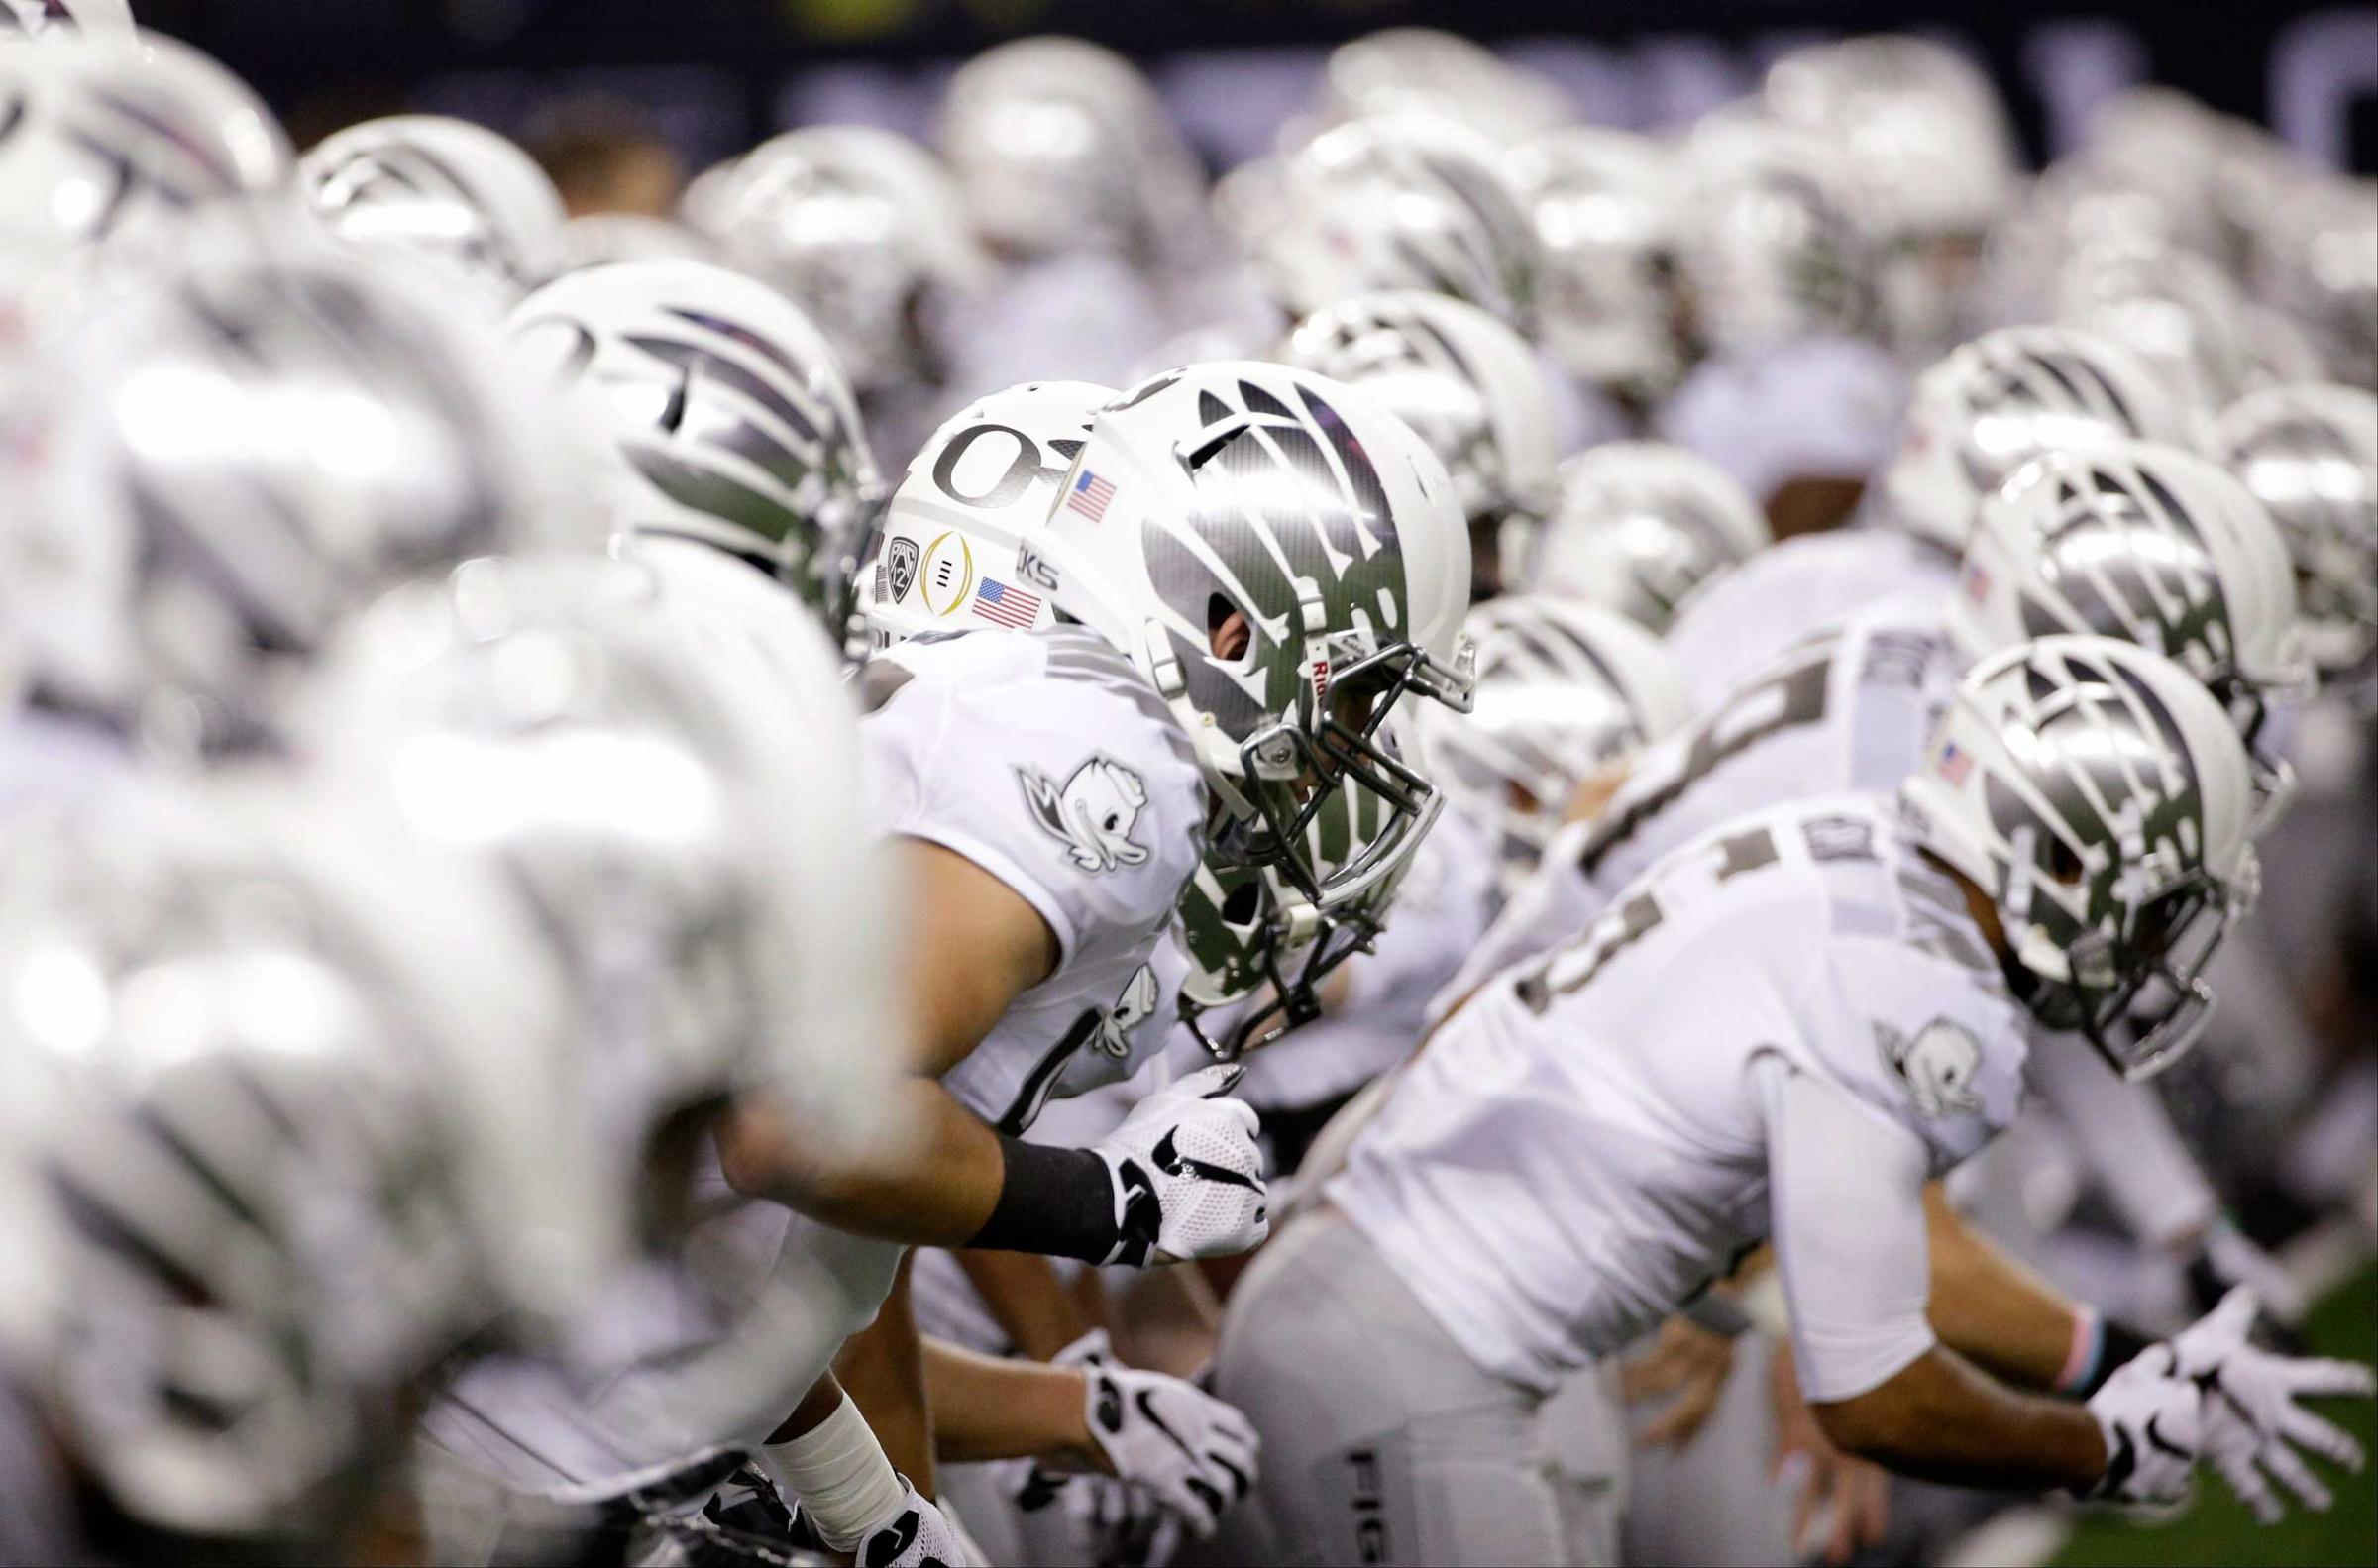 Oregon players warm up before the NCAA college football playoff championship game against Ohio State on Jan. 12, 2015, in Arlington, Texas.